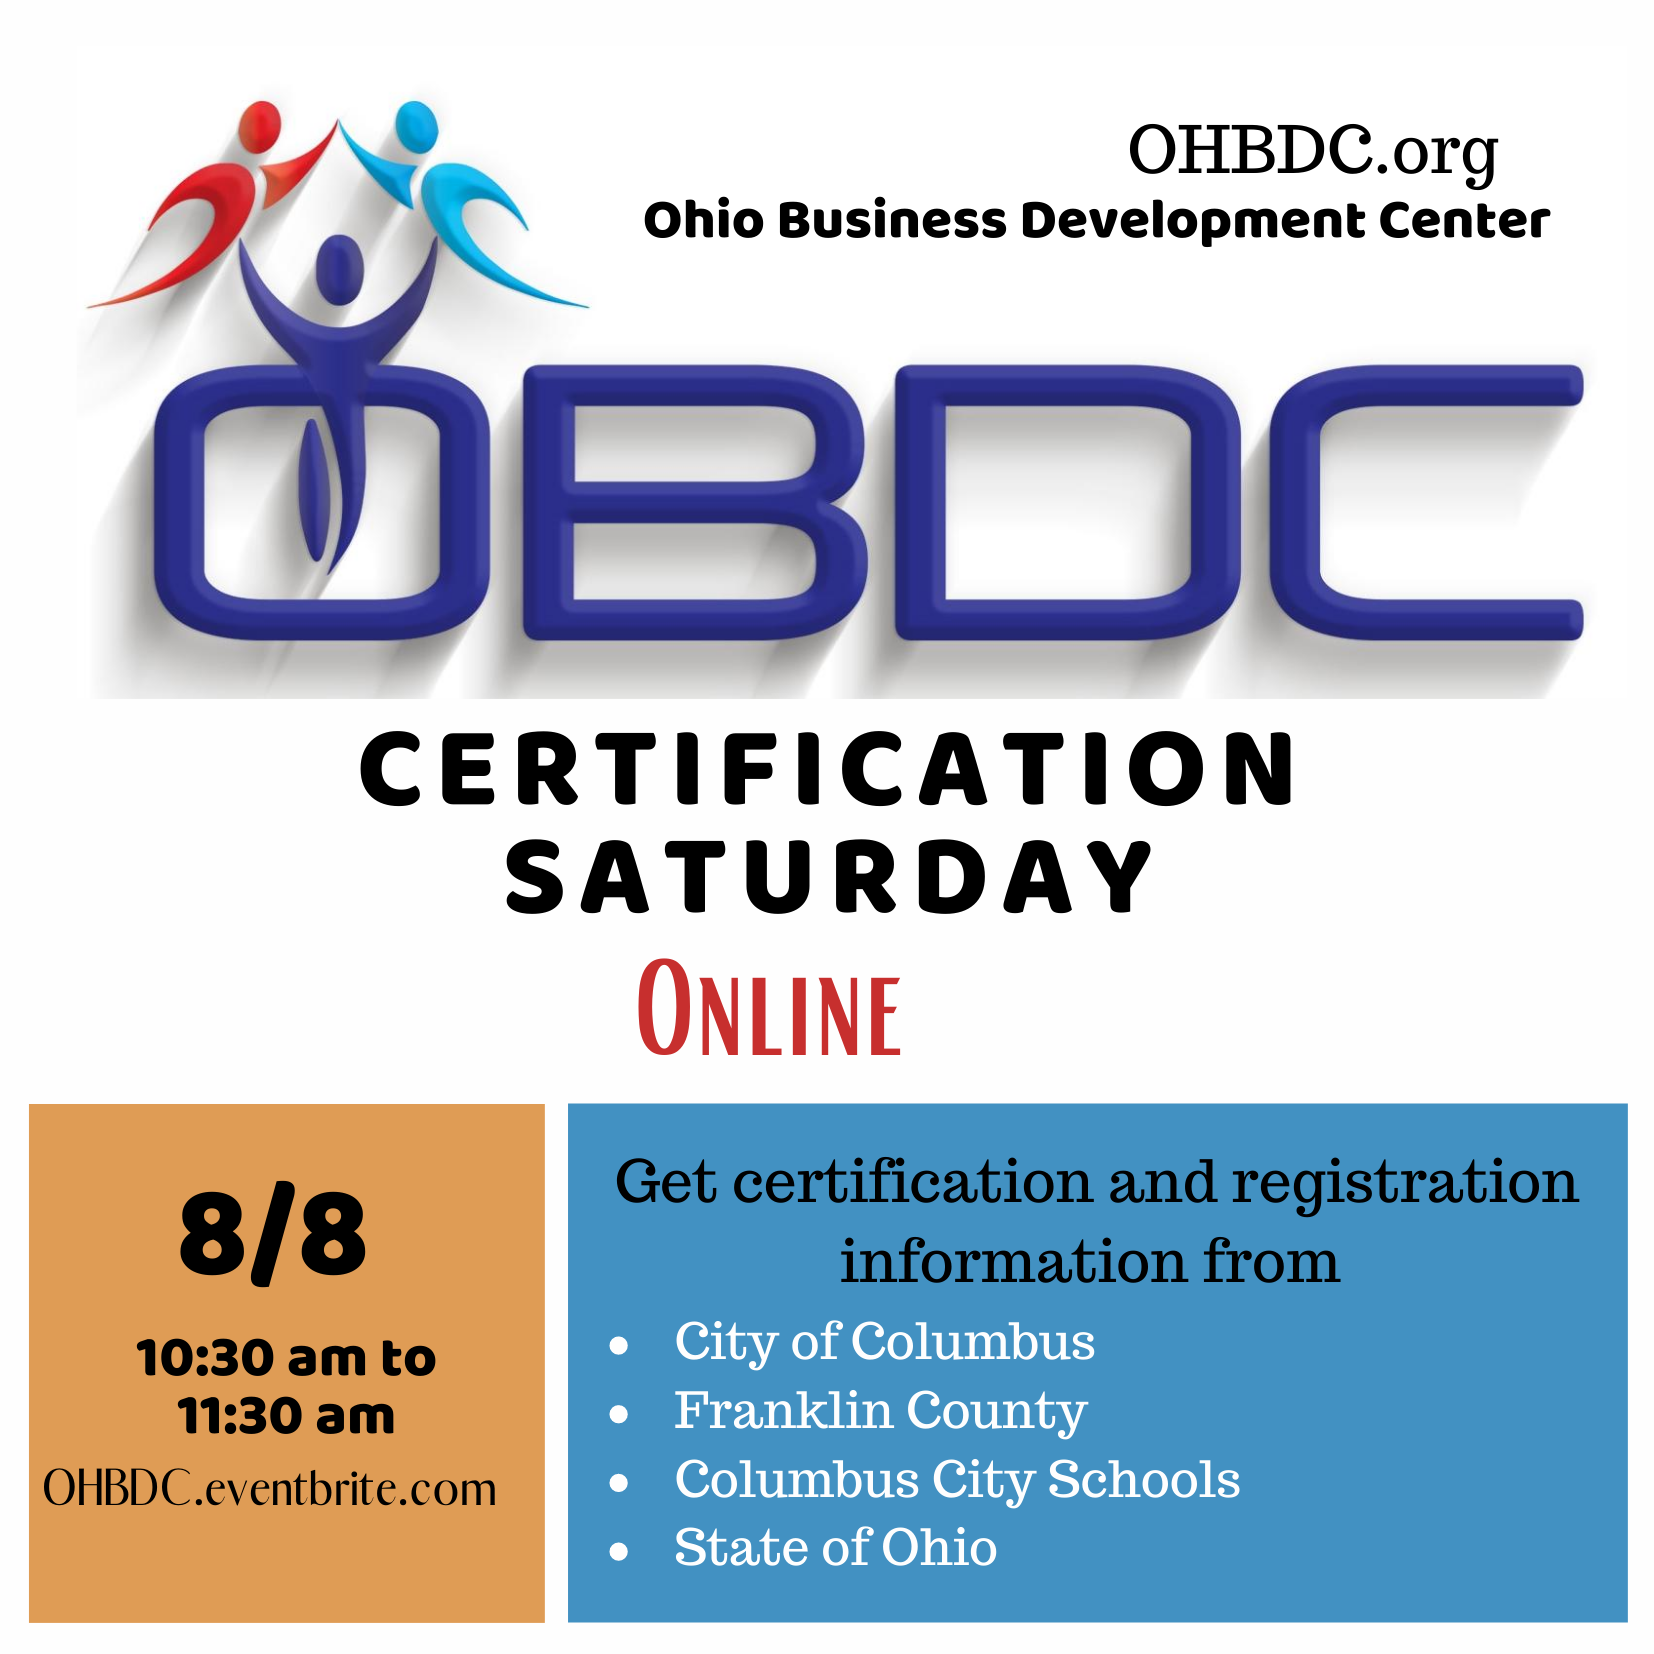 Now is the time to get MBE or WBE Certification with the City of